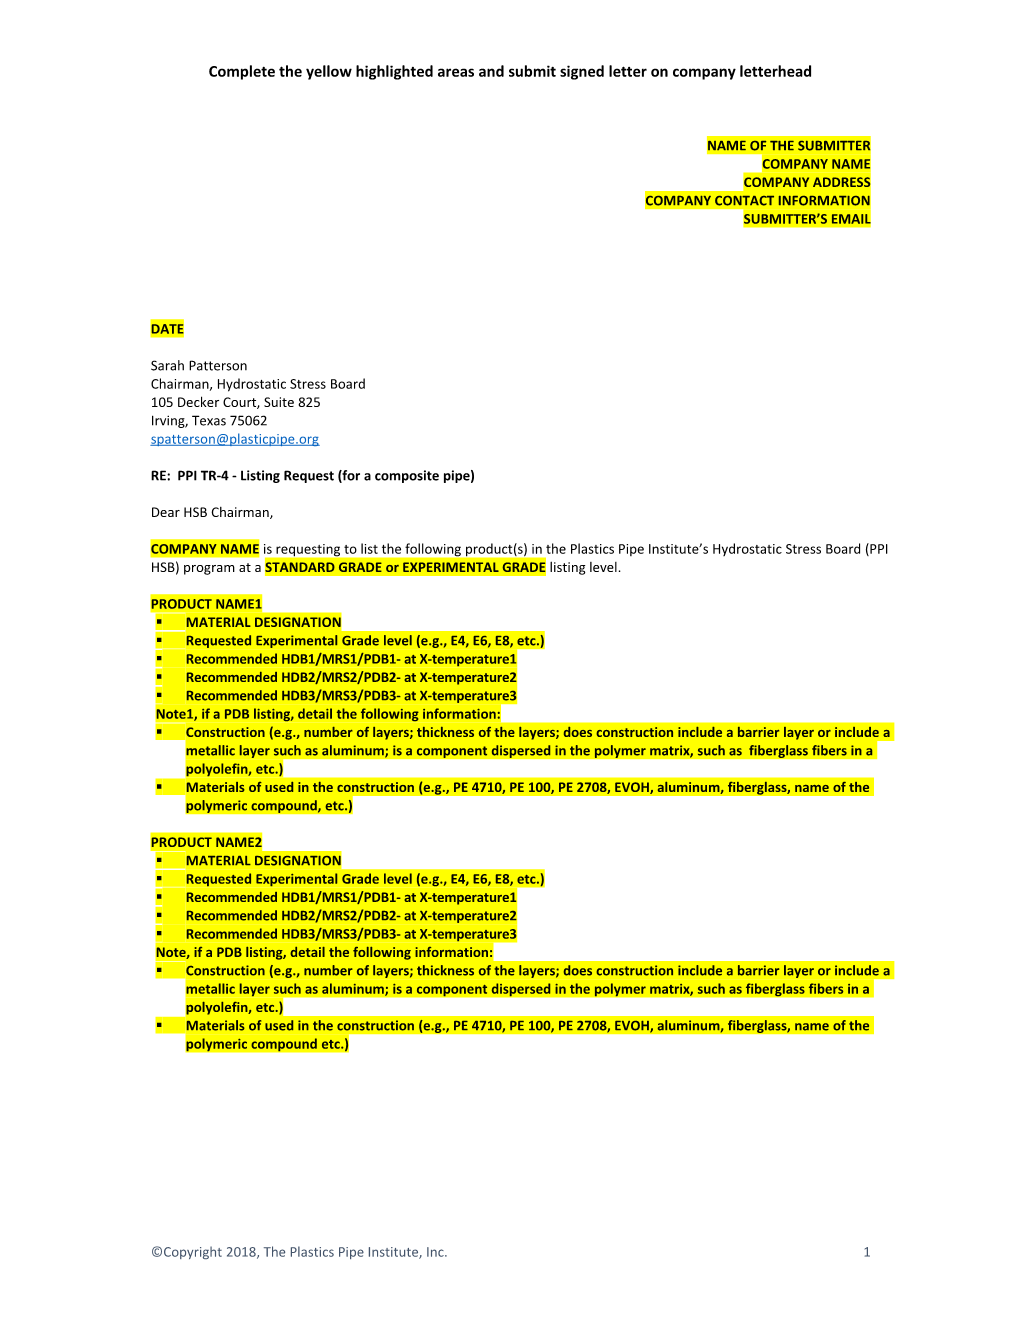 Complete the Yellow Highlighted Areas and Submit Signed Letter on Company Letterhead